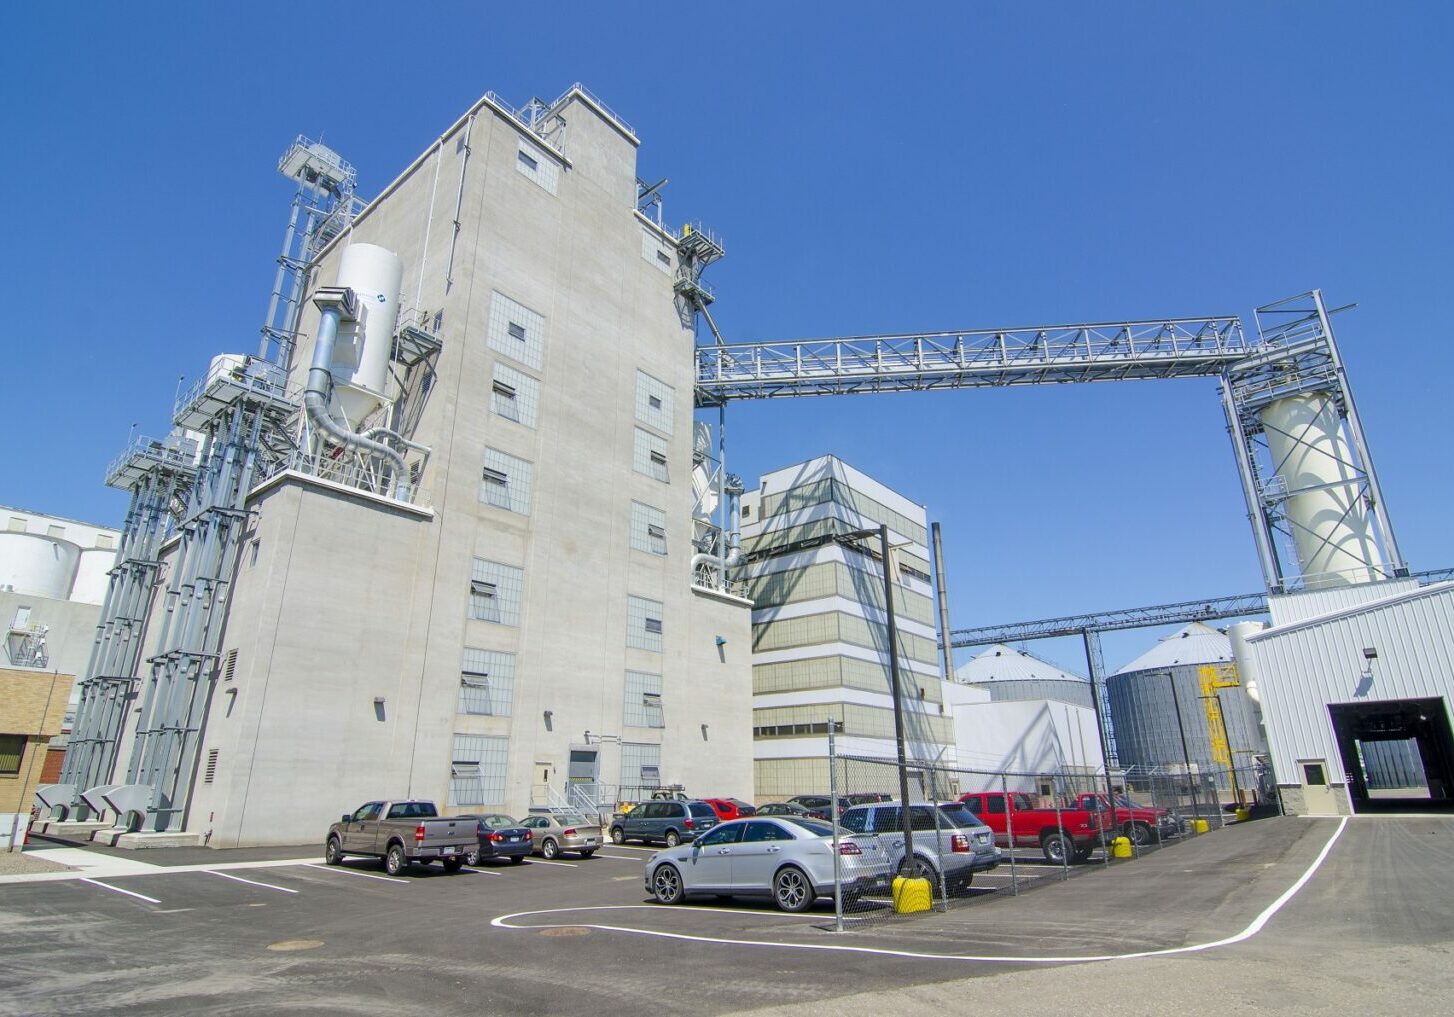 Exterior view of large grain cleaning facility with vehicles parked in the foreground